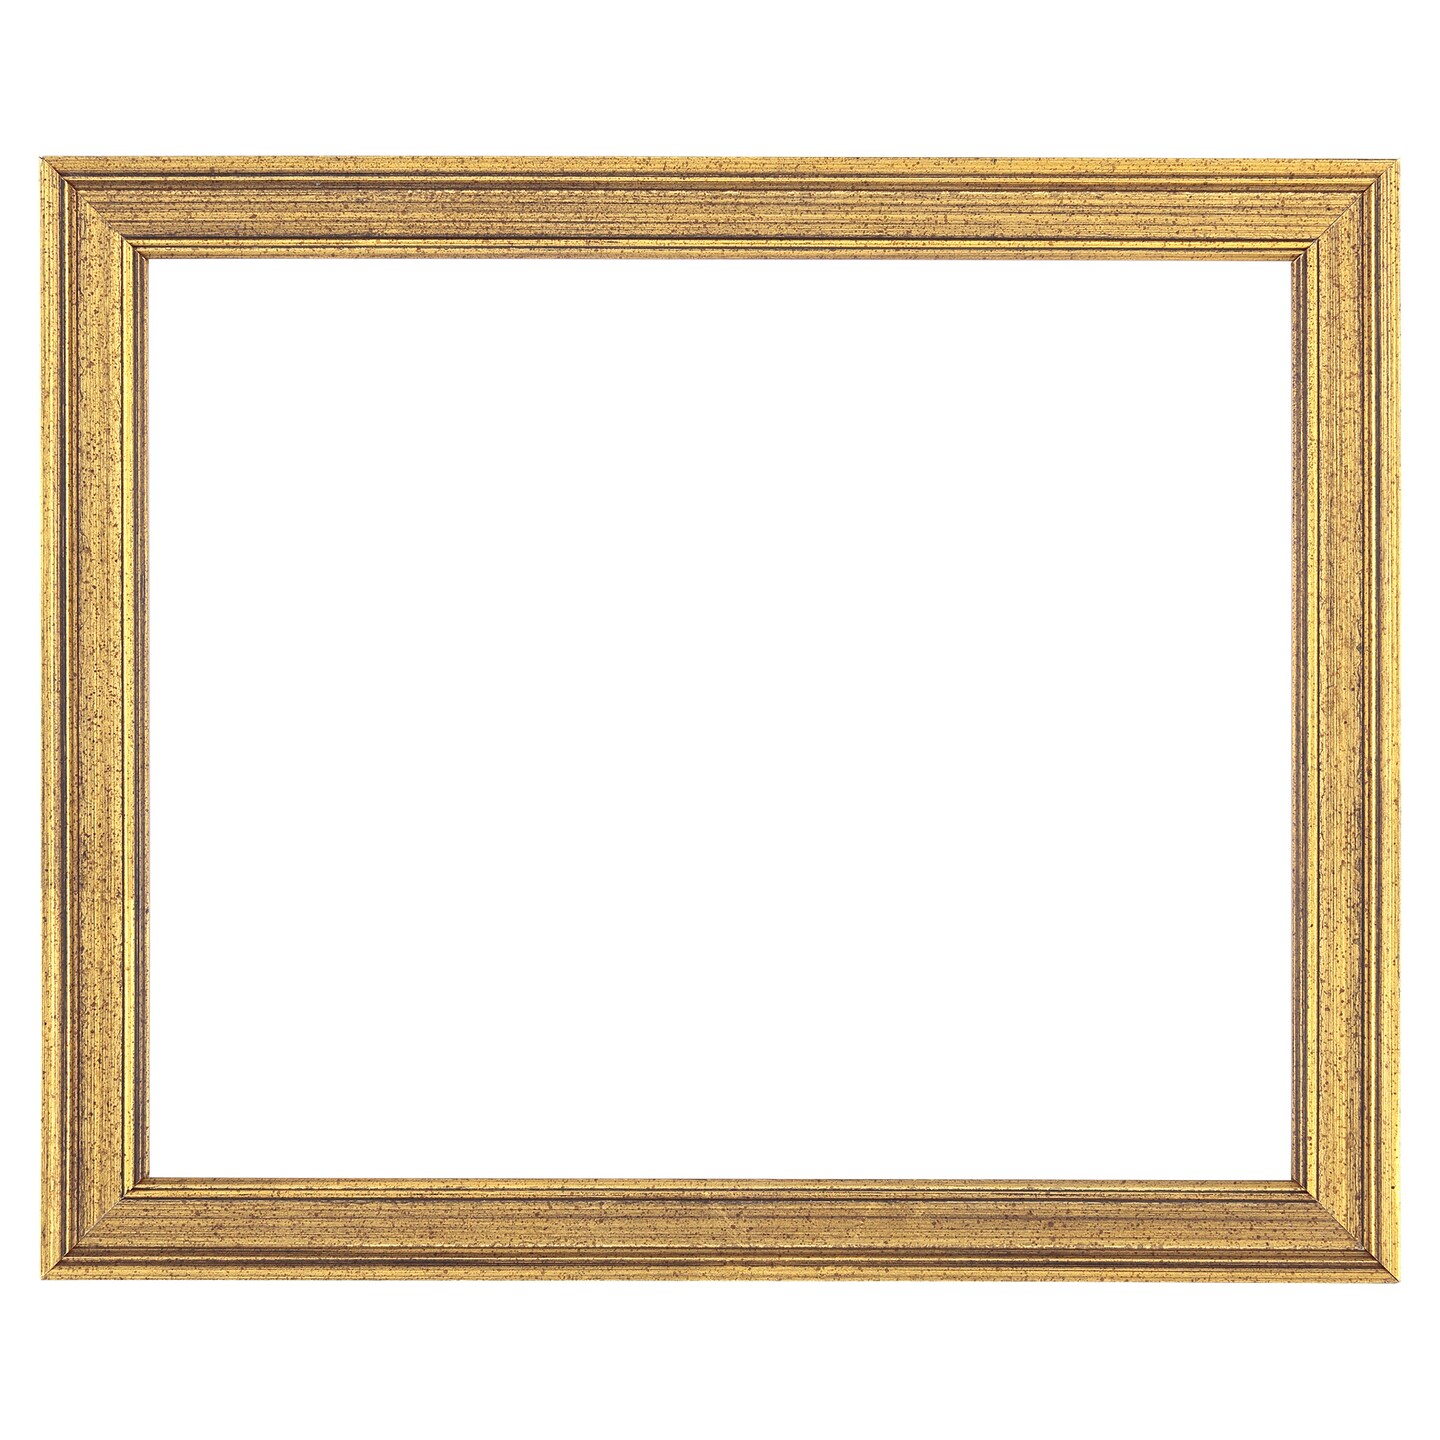 Gallery Wall Classic Ornate 30x30 Picture Frames Gold 30x30 Frame 30 x 30  Poster Frames 30 x 30